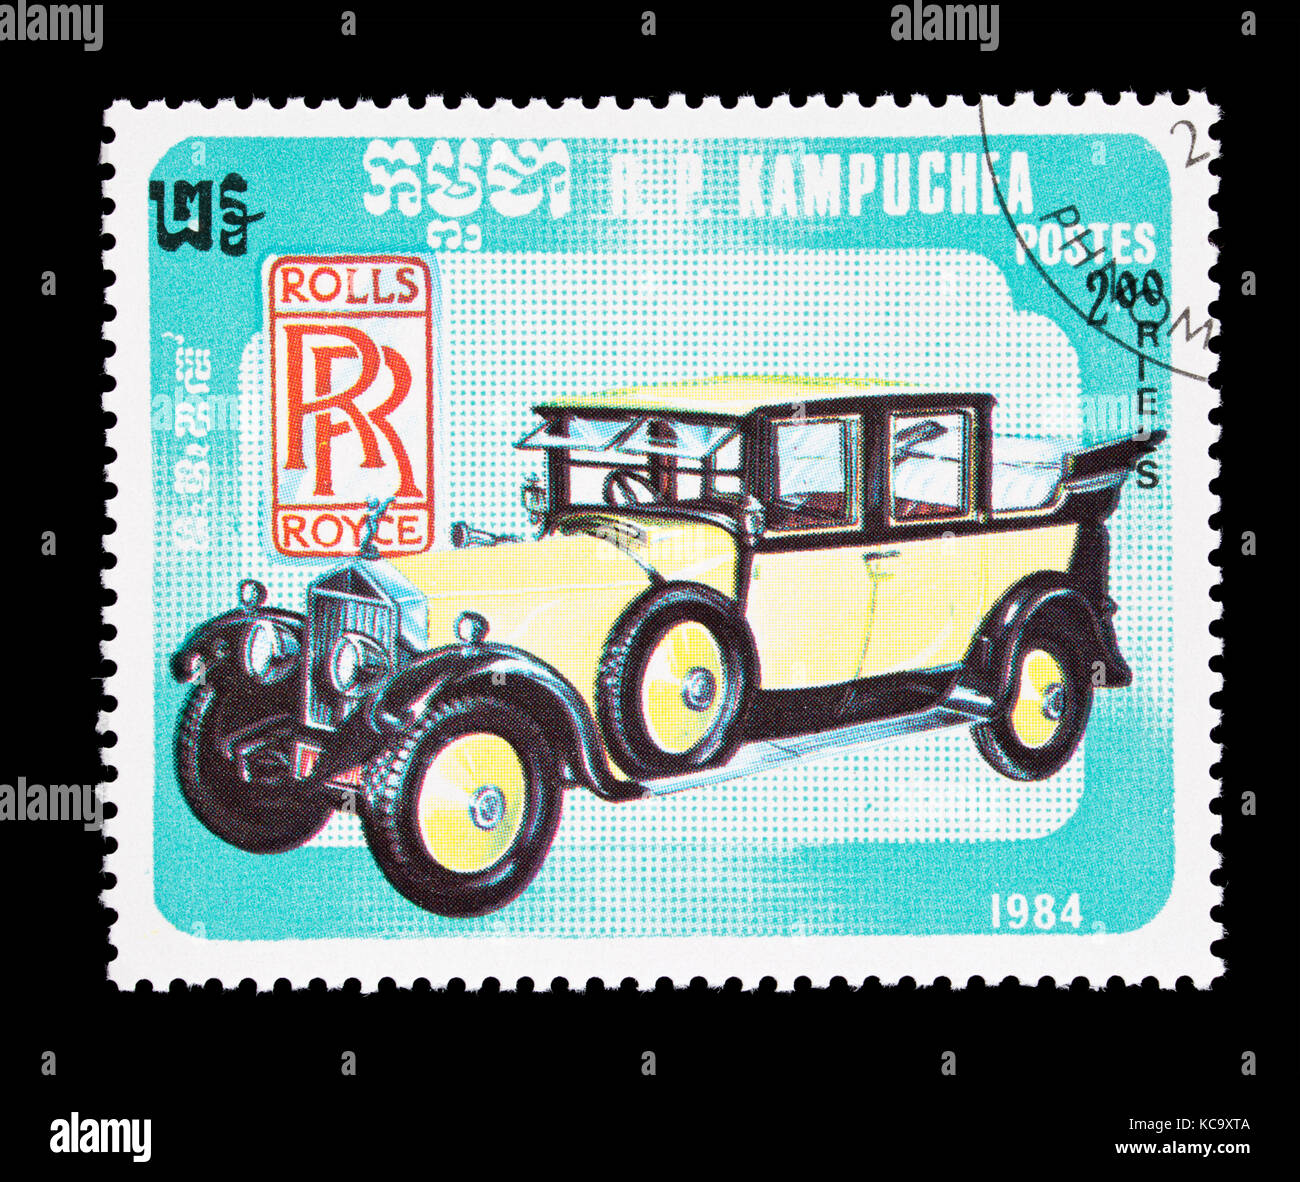 Postage stamp from Cambodia (Kampuchea) depicting a classic Rolls Royce. Stock Photo